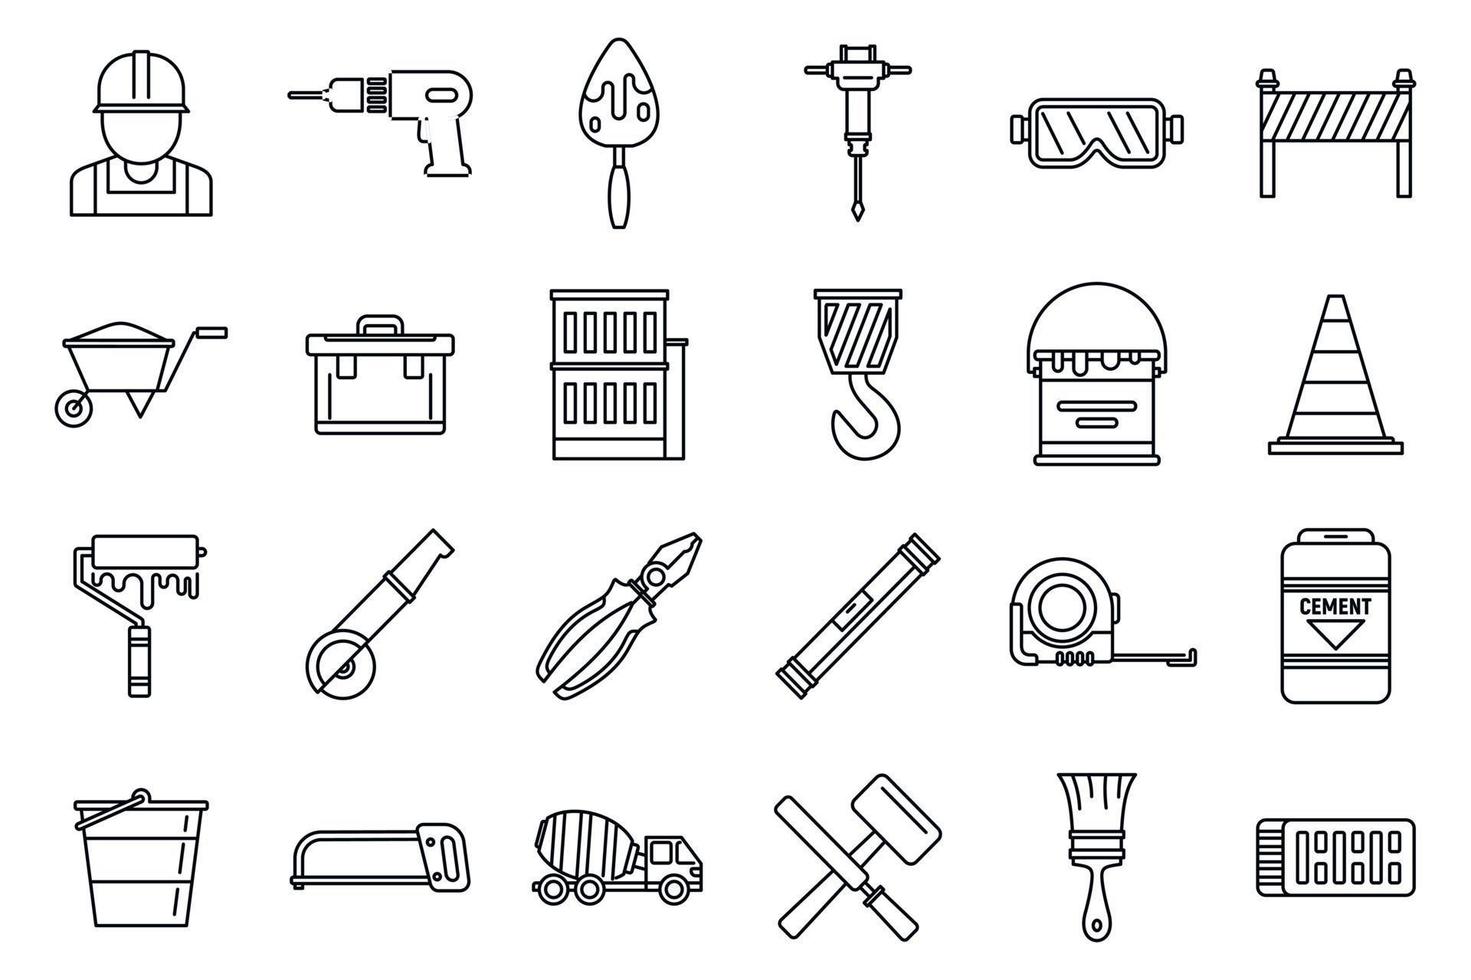 Modern building reconstruction icons set, outline style vector